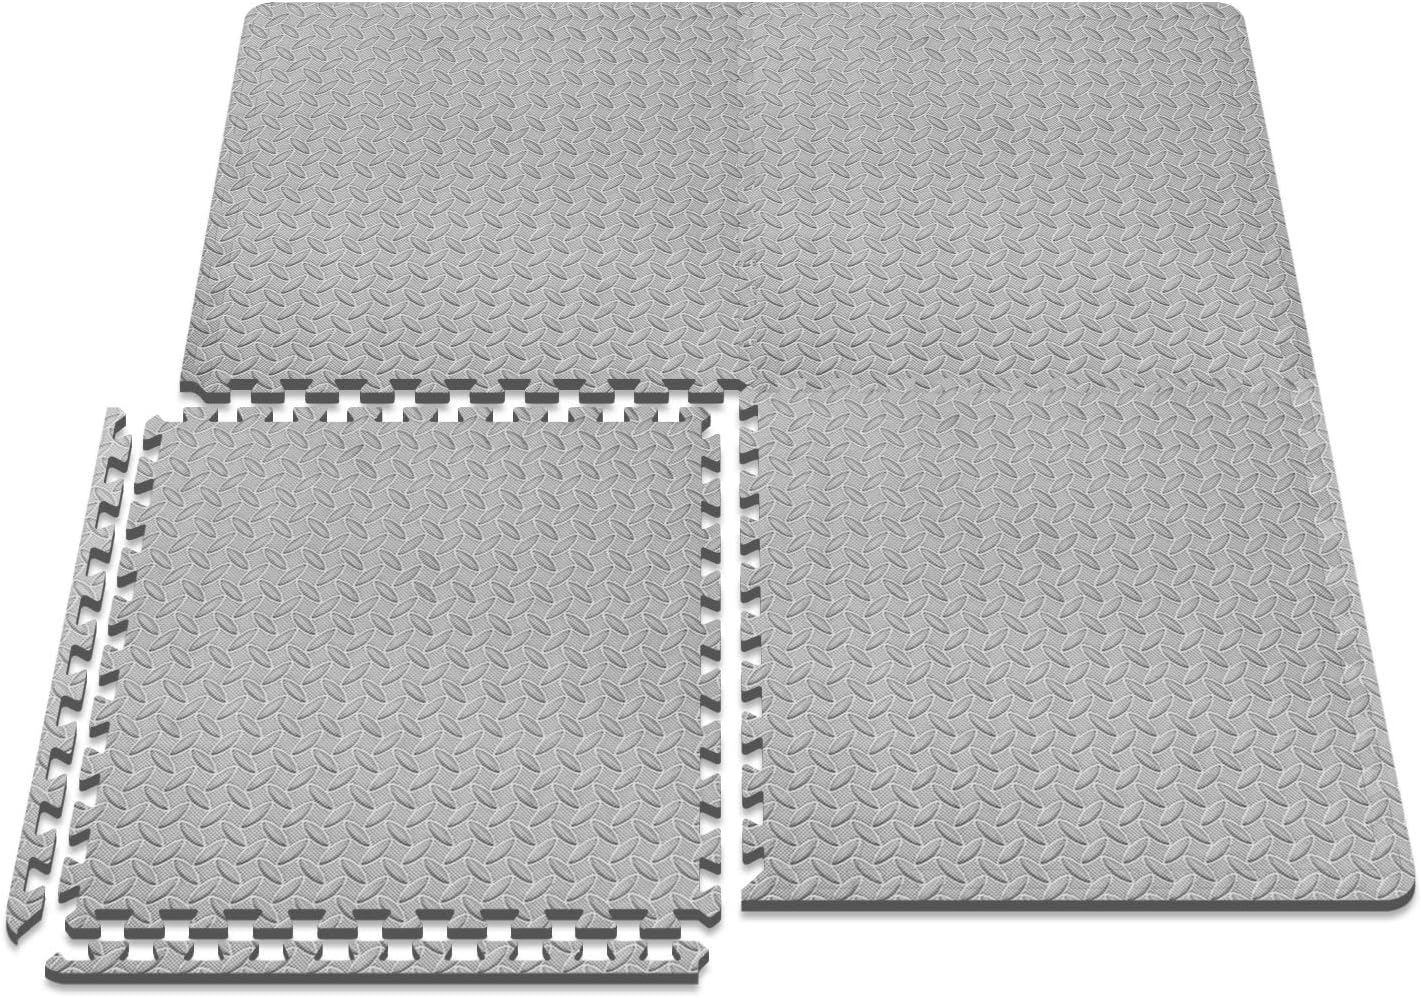 Puzzle Exercise Mat With 12/24/48 Tiles Interlocking Foam Gym Mats 24'' x 24'' Eva Foam Floor Tiles Protective Flooring Mats For Gym Equipment By PAIDU